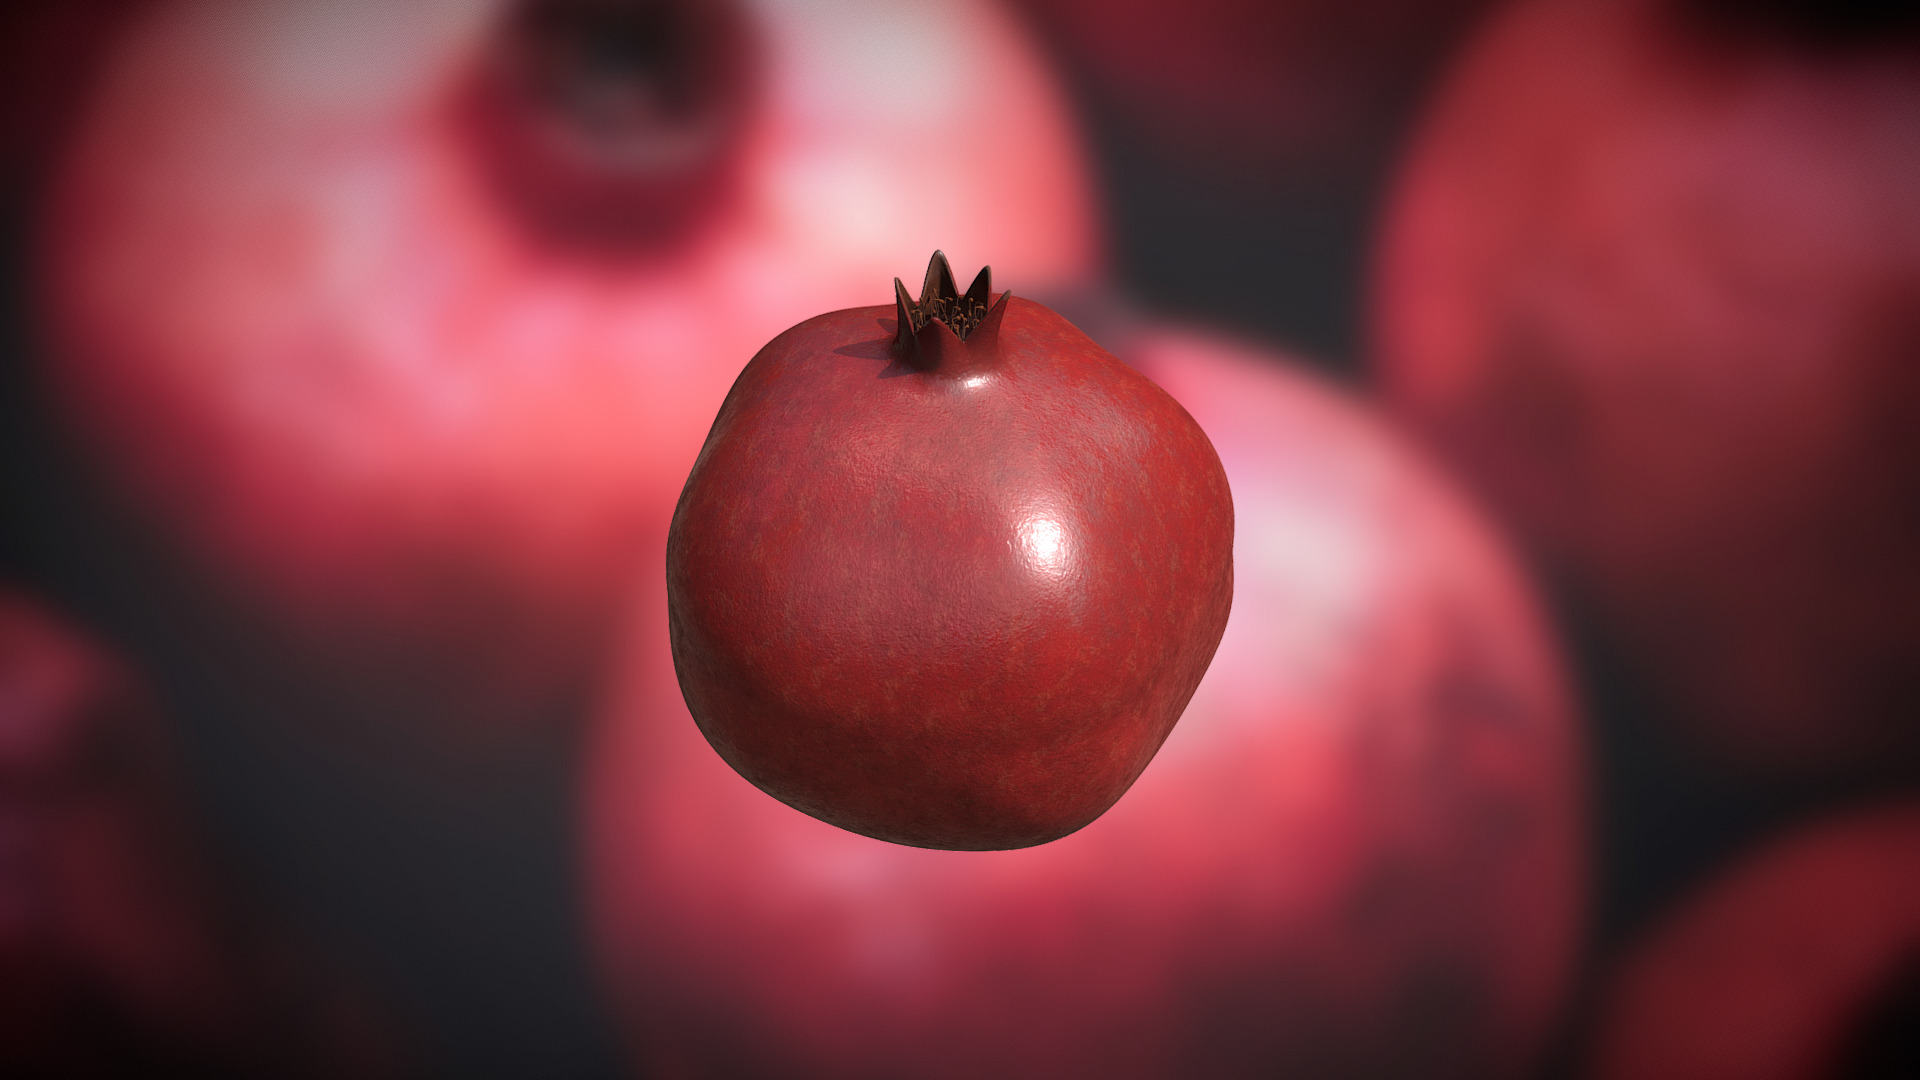 3D model Pomegranate - This is a 3D model of the Pomegranate. The 3D model is about a red apple with a stem.